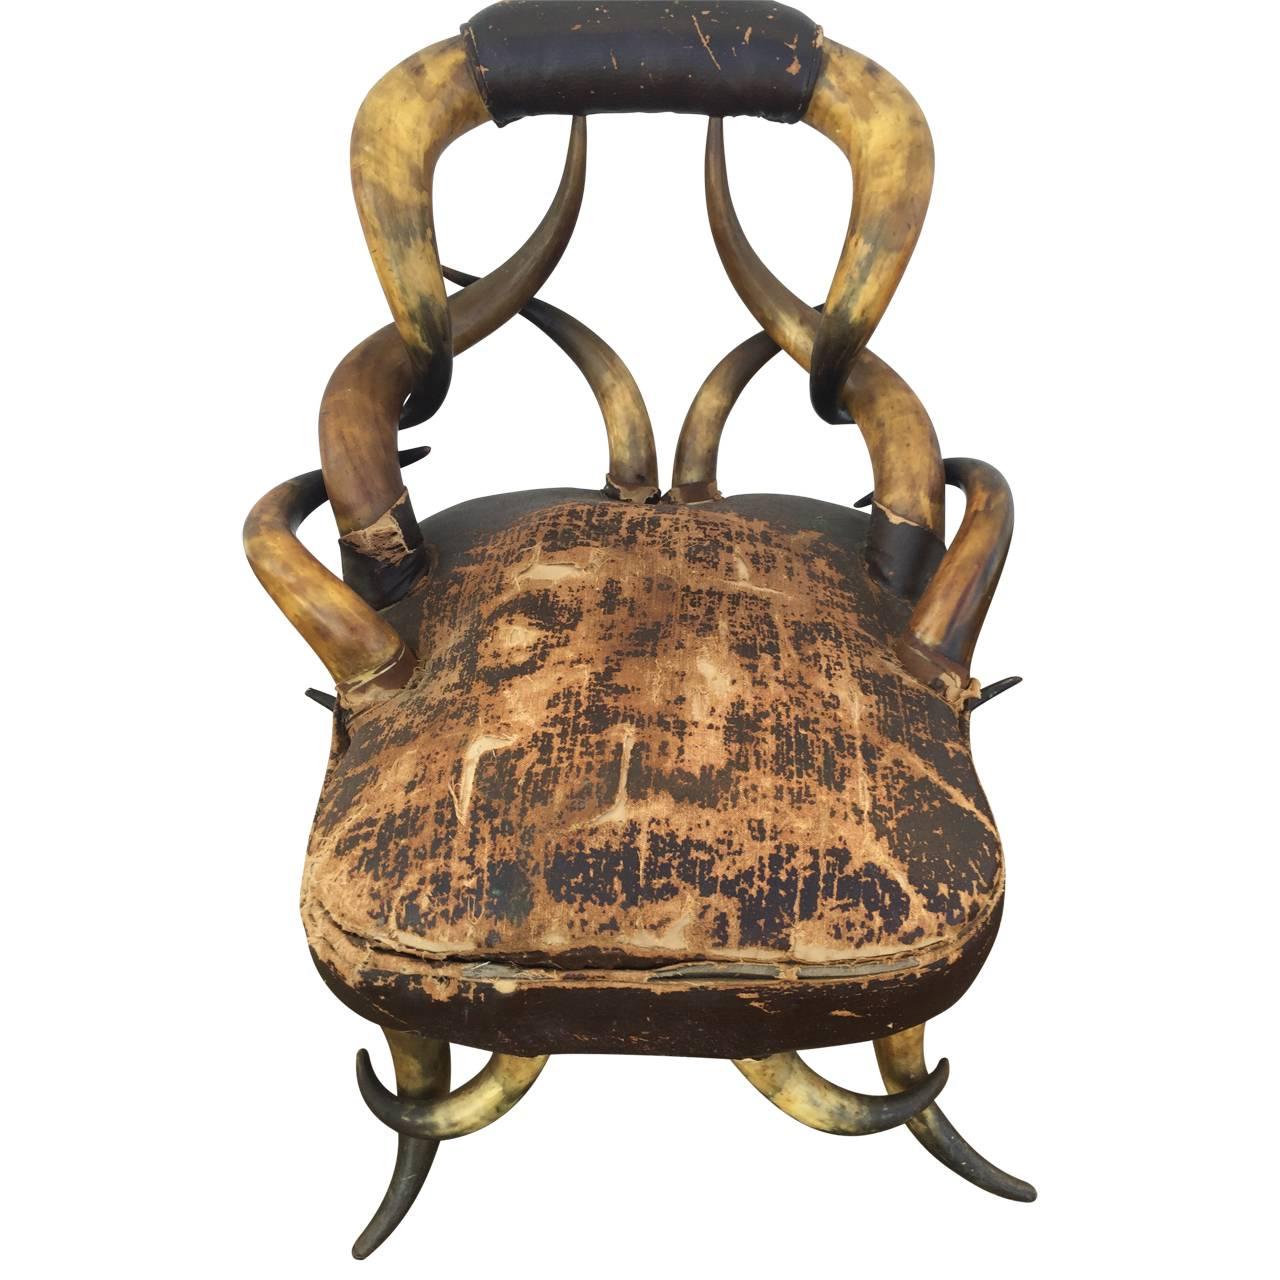 Horn 19th Century Longhorn Chair                   Attributed to Teddy Roosevelt